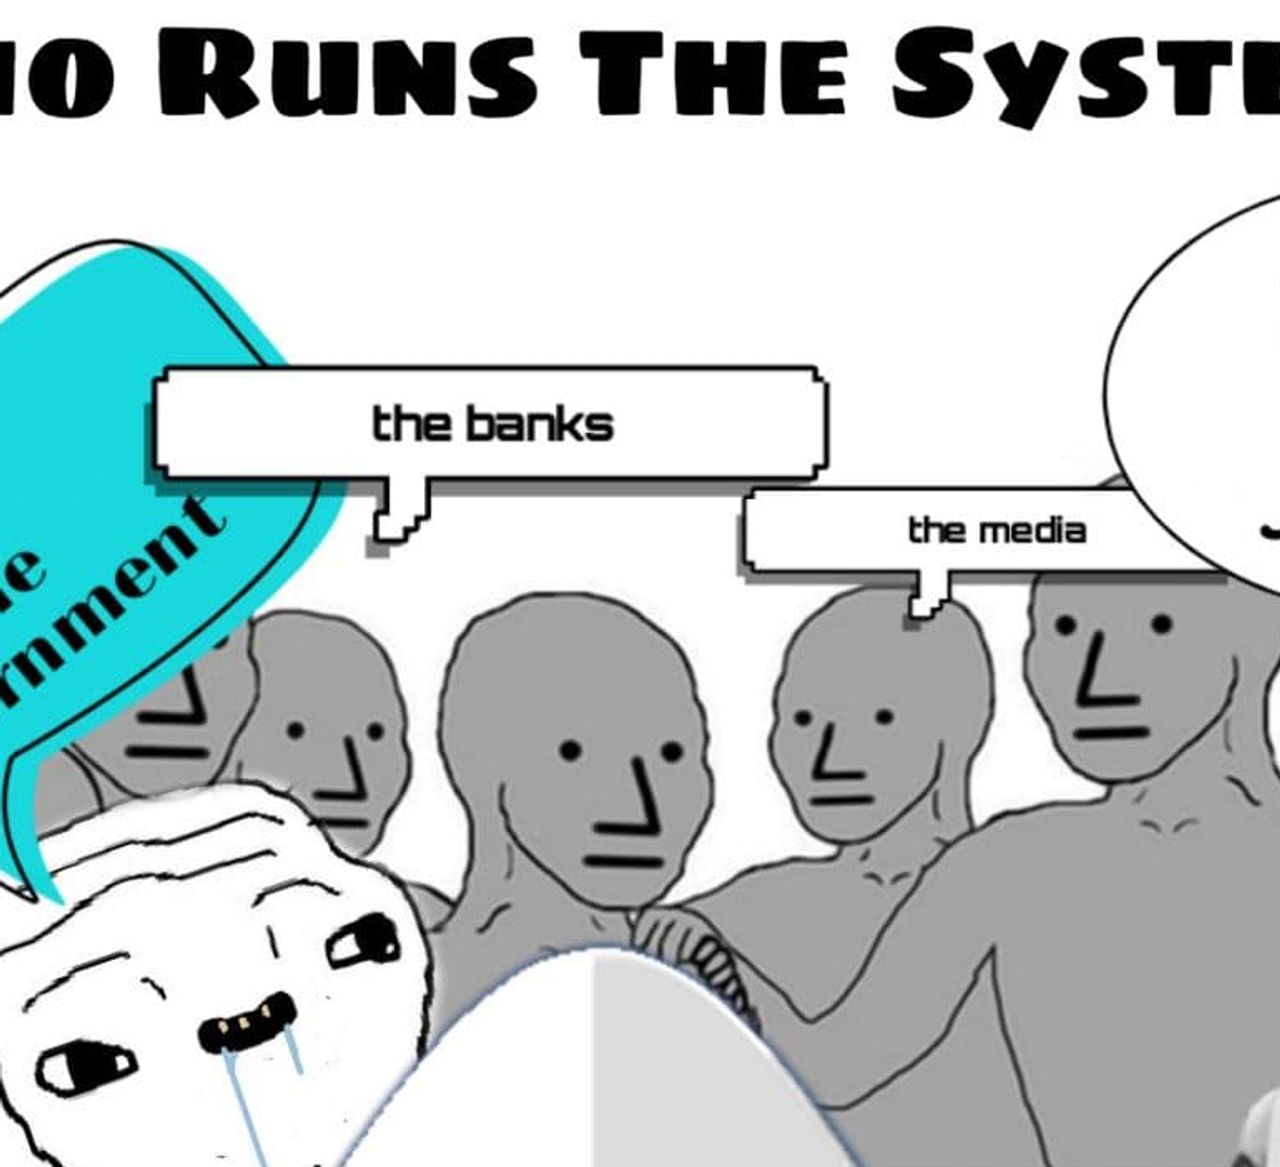 The image shows an IQ Bell curve, labelled 'Who runs the system?'. On the left, in order, two unintelligent looking wojaks say 'it's white people' and 'it's the government, respectively. Atop, a group of NPCs say 'the banks' and 'the media'. On the right, Joseph Goebels says 'it's the Jews'.